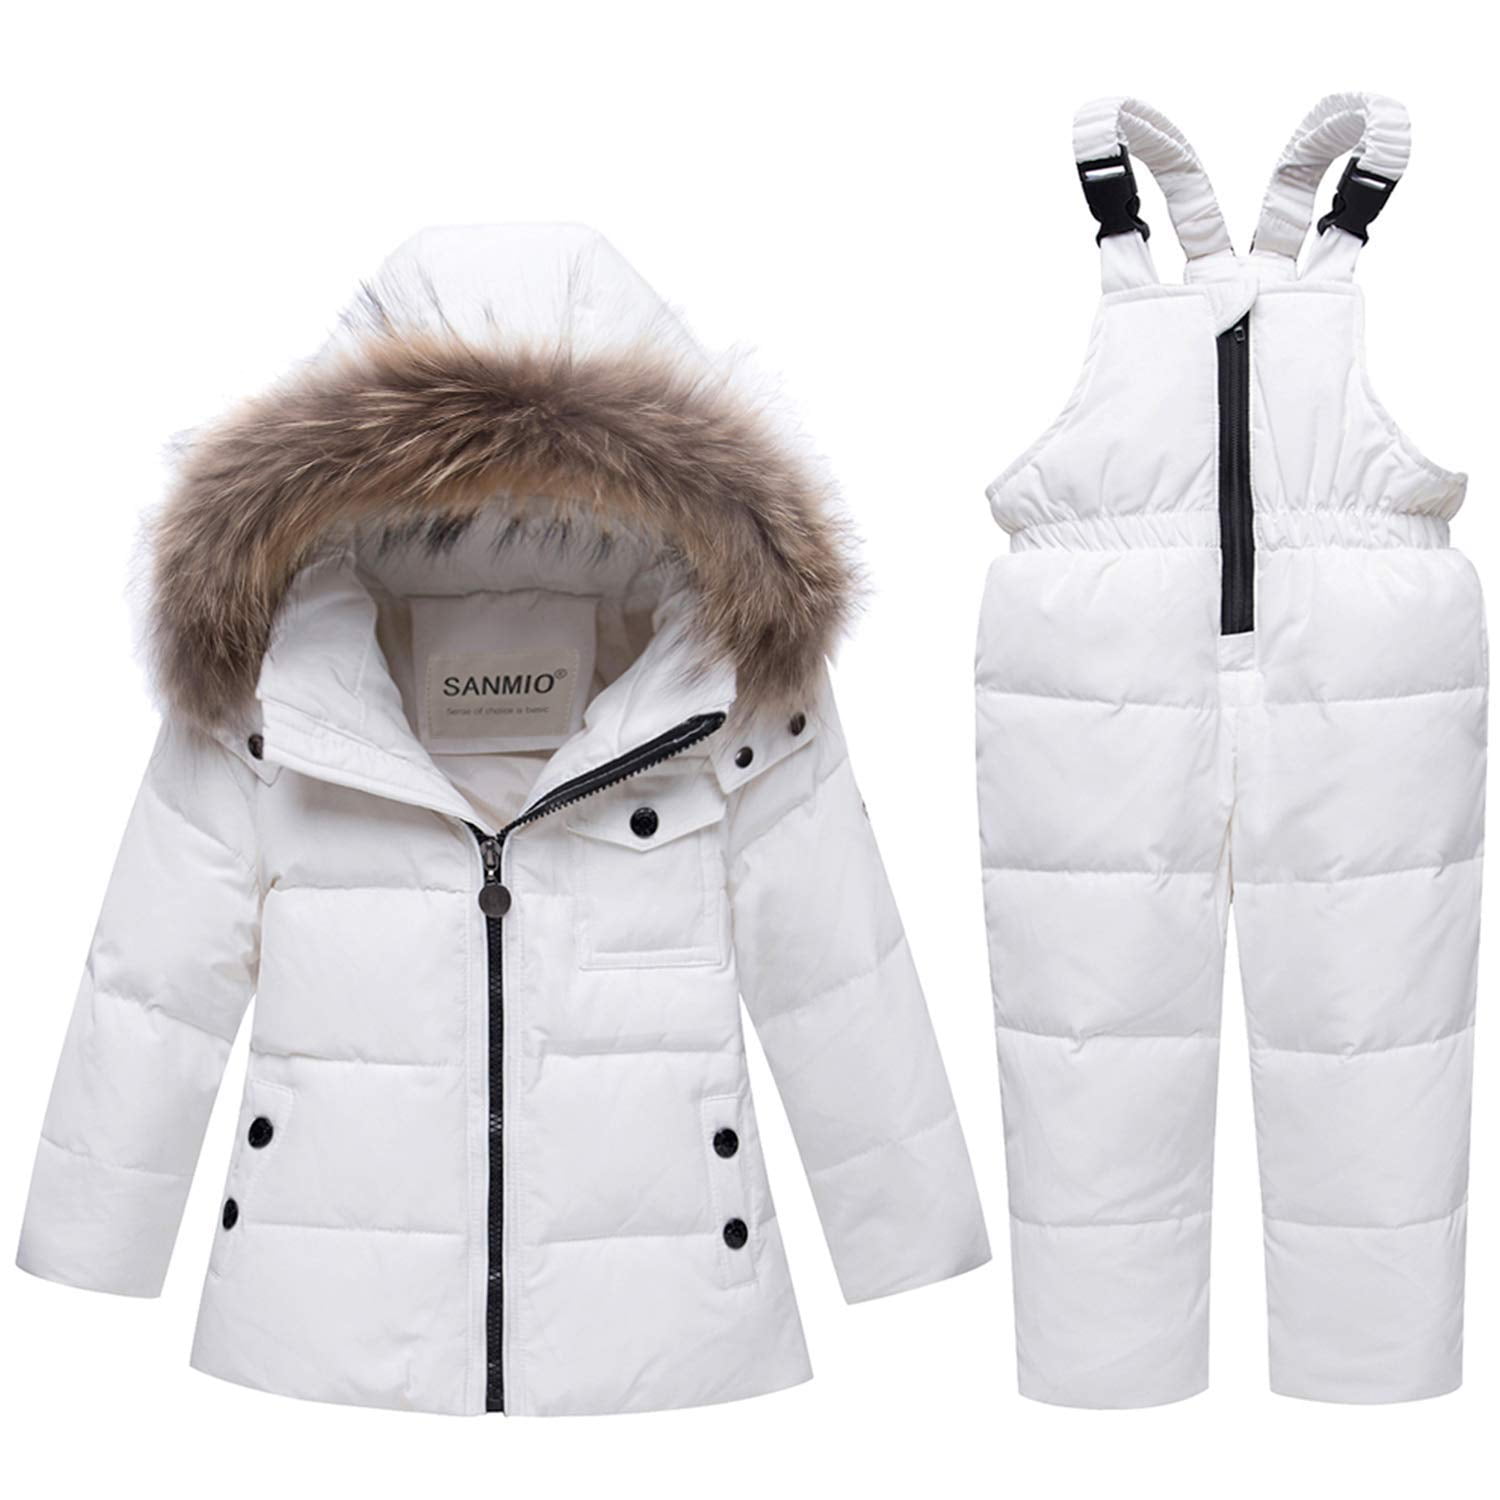 SANMIO Unisex Baby Winter Jacket Warm Snowsuit Down Jacket Ski Suit Cute Hooded Snow Trousers Down Jacket 2pcs Clothing Set Thickened White 